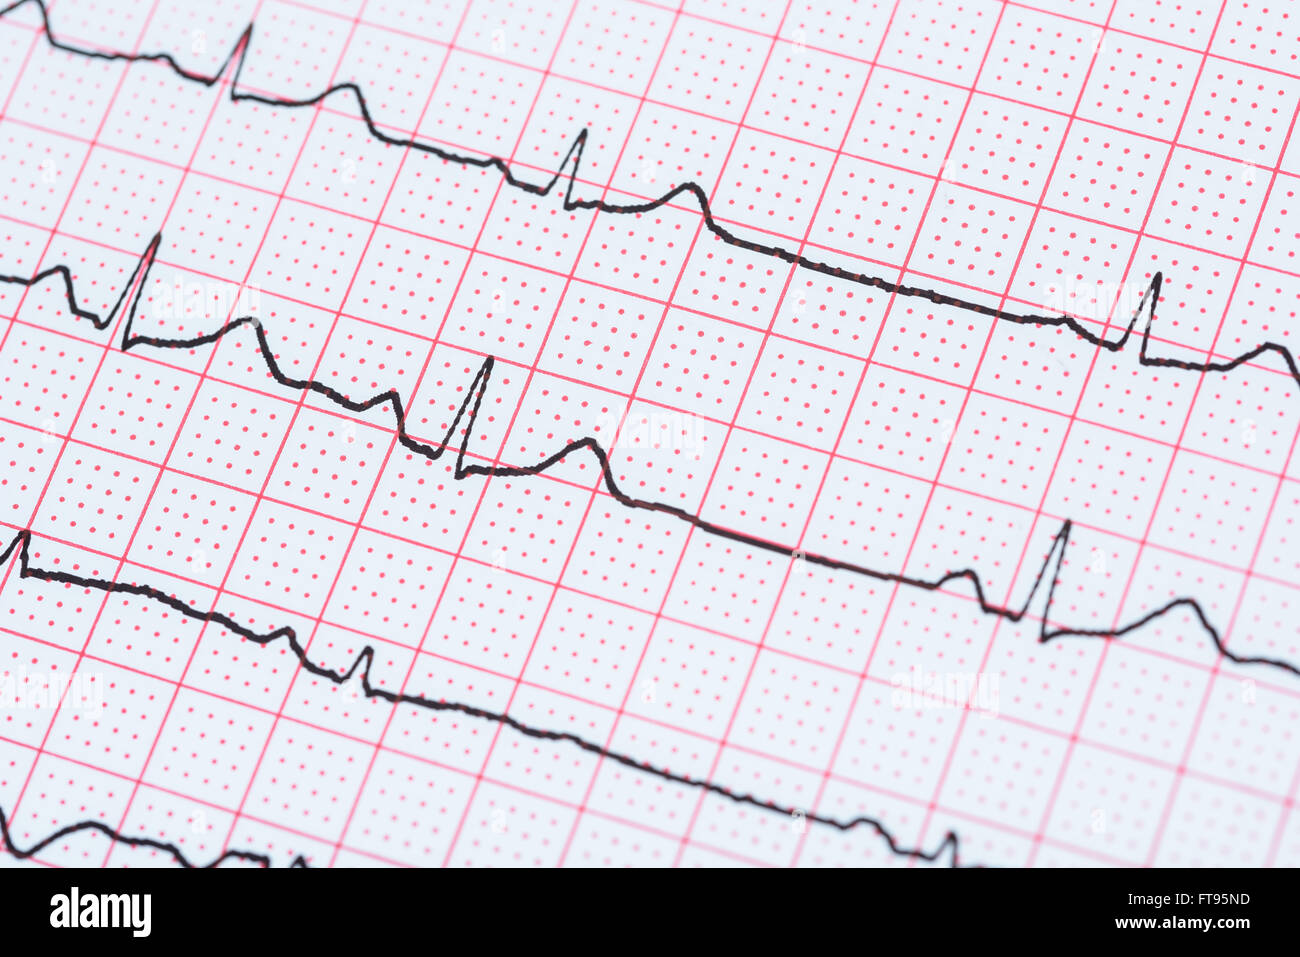 Sinus Heart Rhythm On Electrocardiogram Record Paper Showing Normal P Wave, PR and QT Interval and QRS Complex Stock Photo